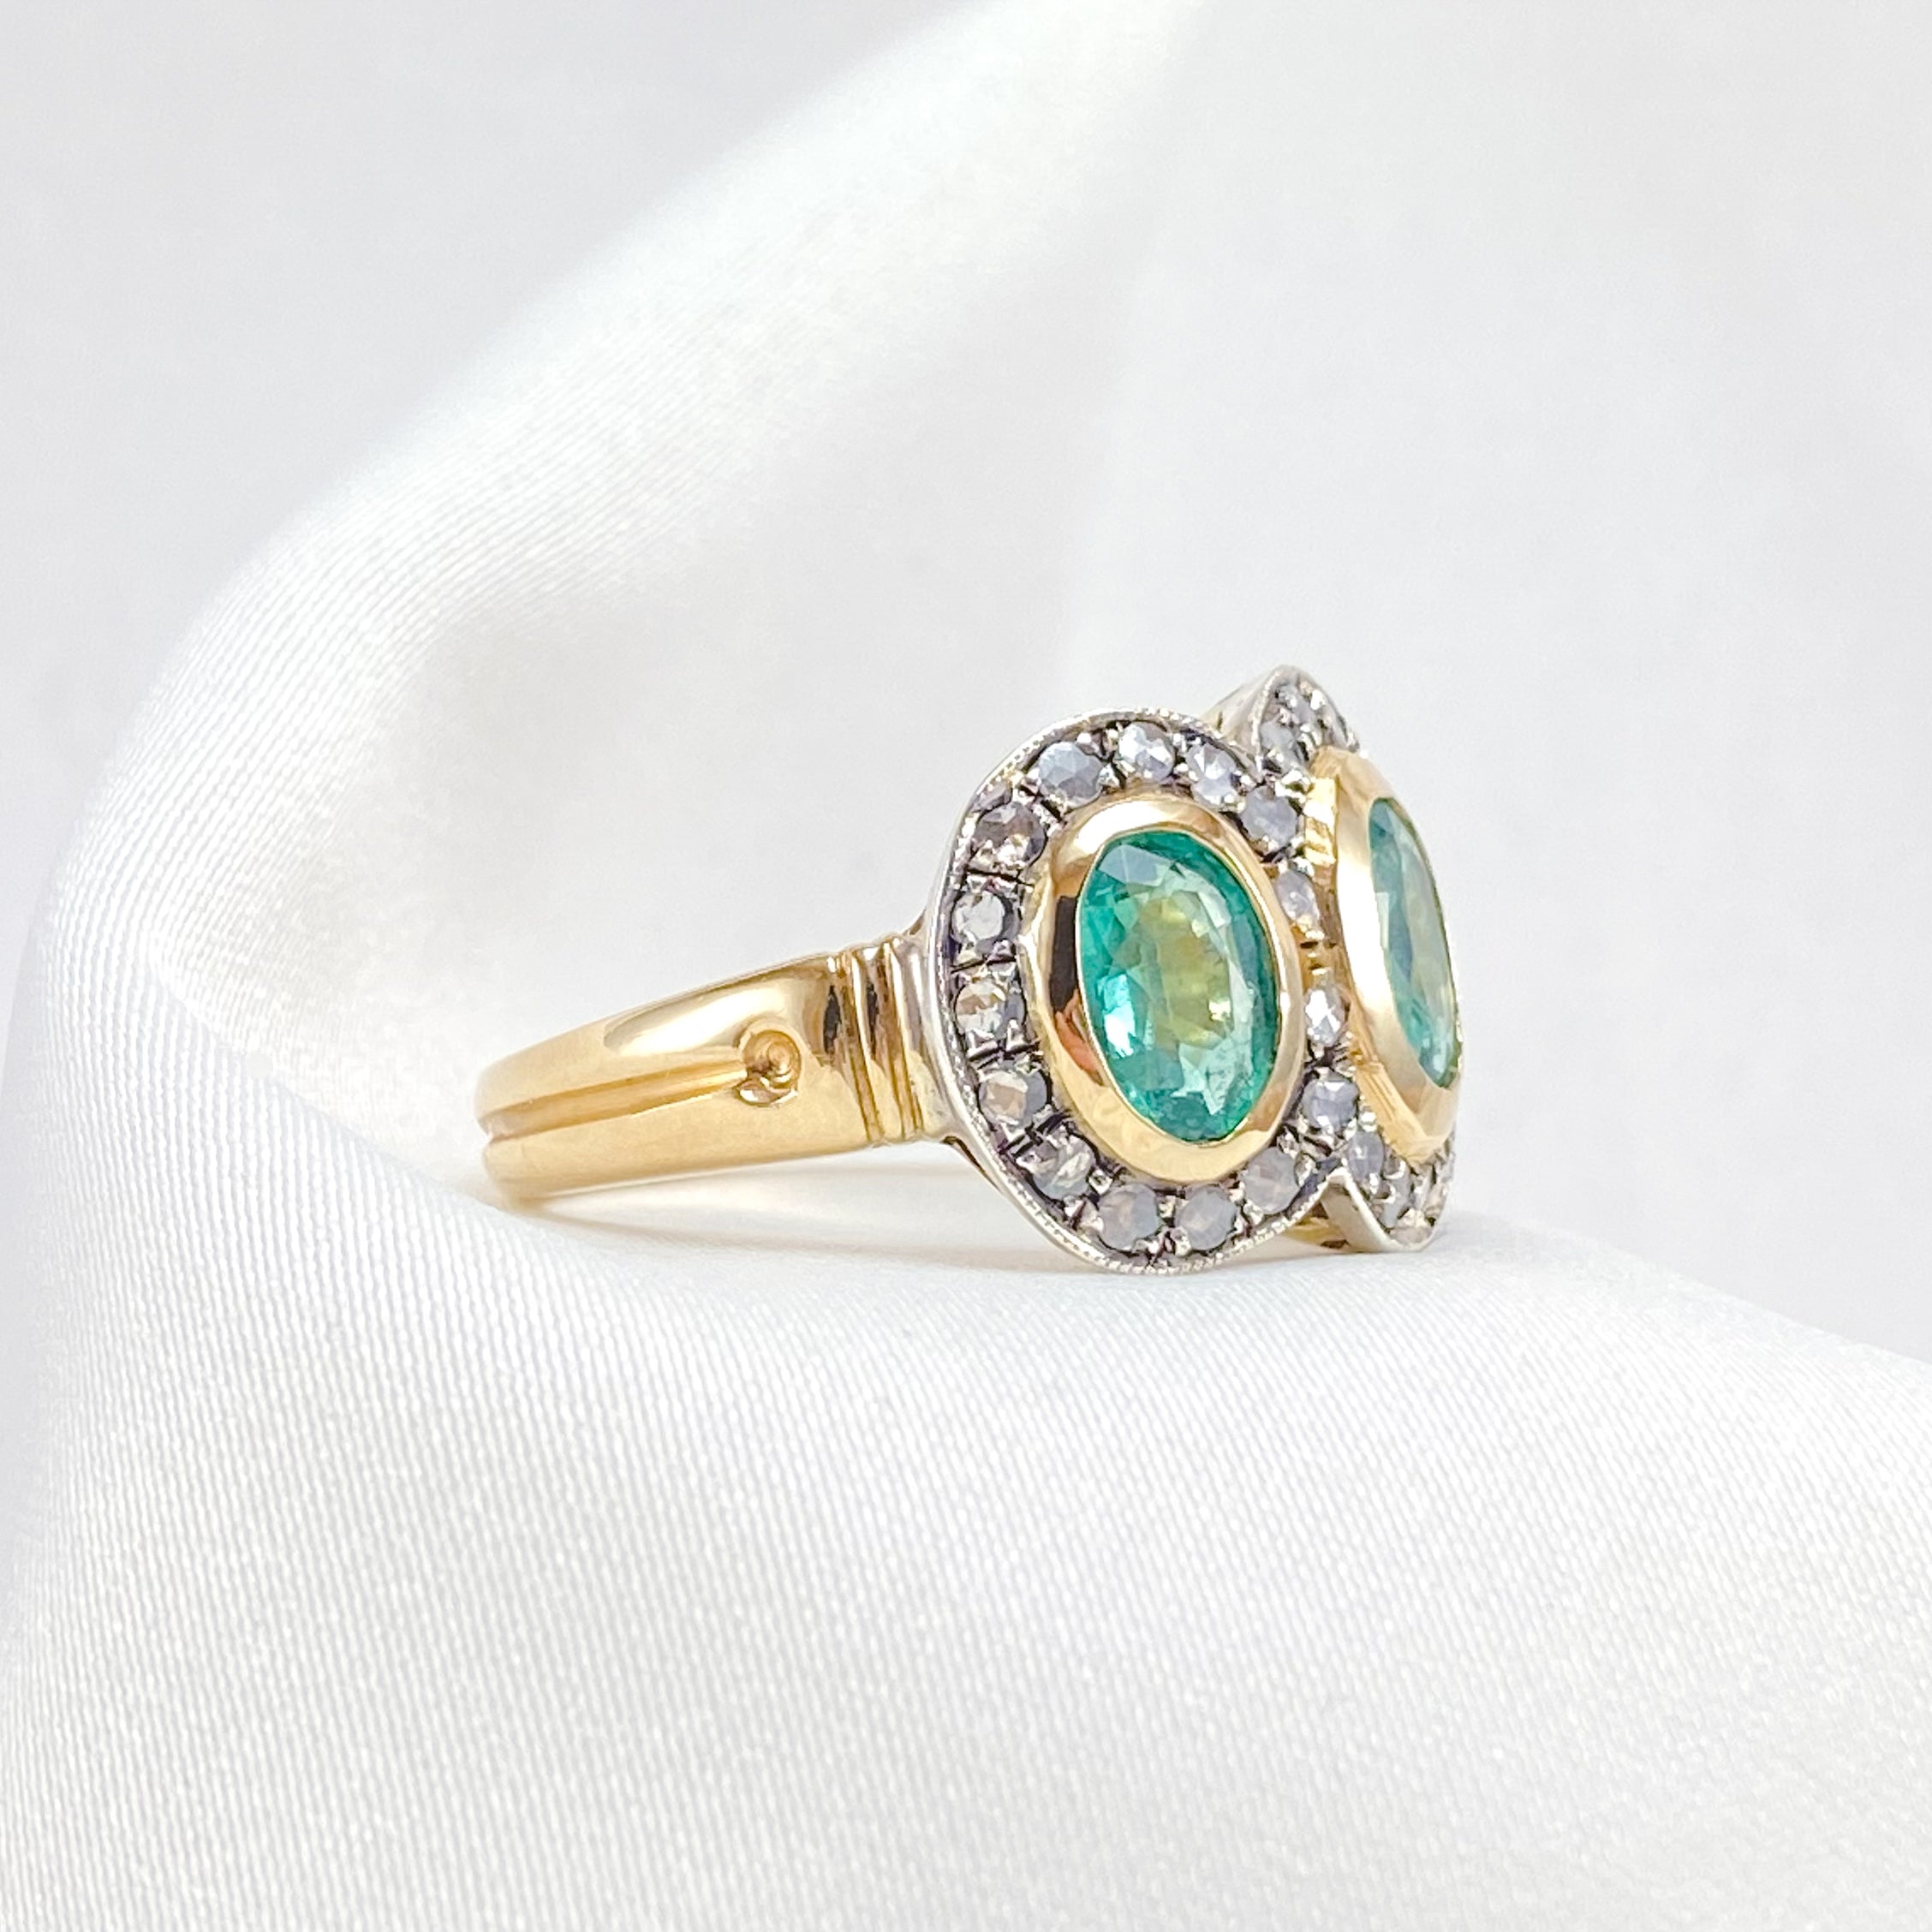 Emerald Trilogy Ring